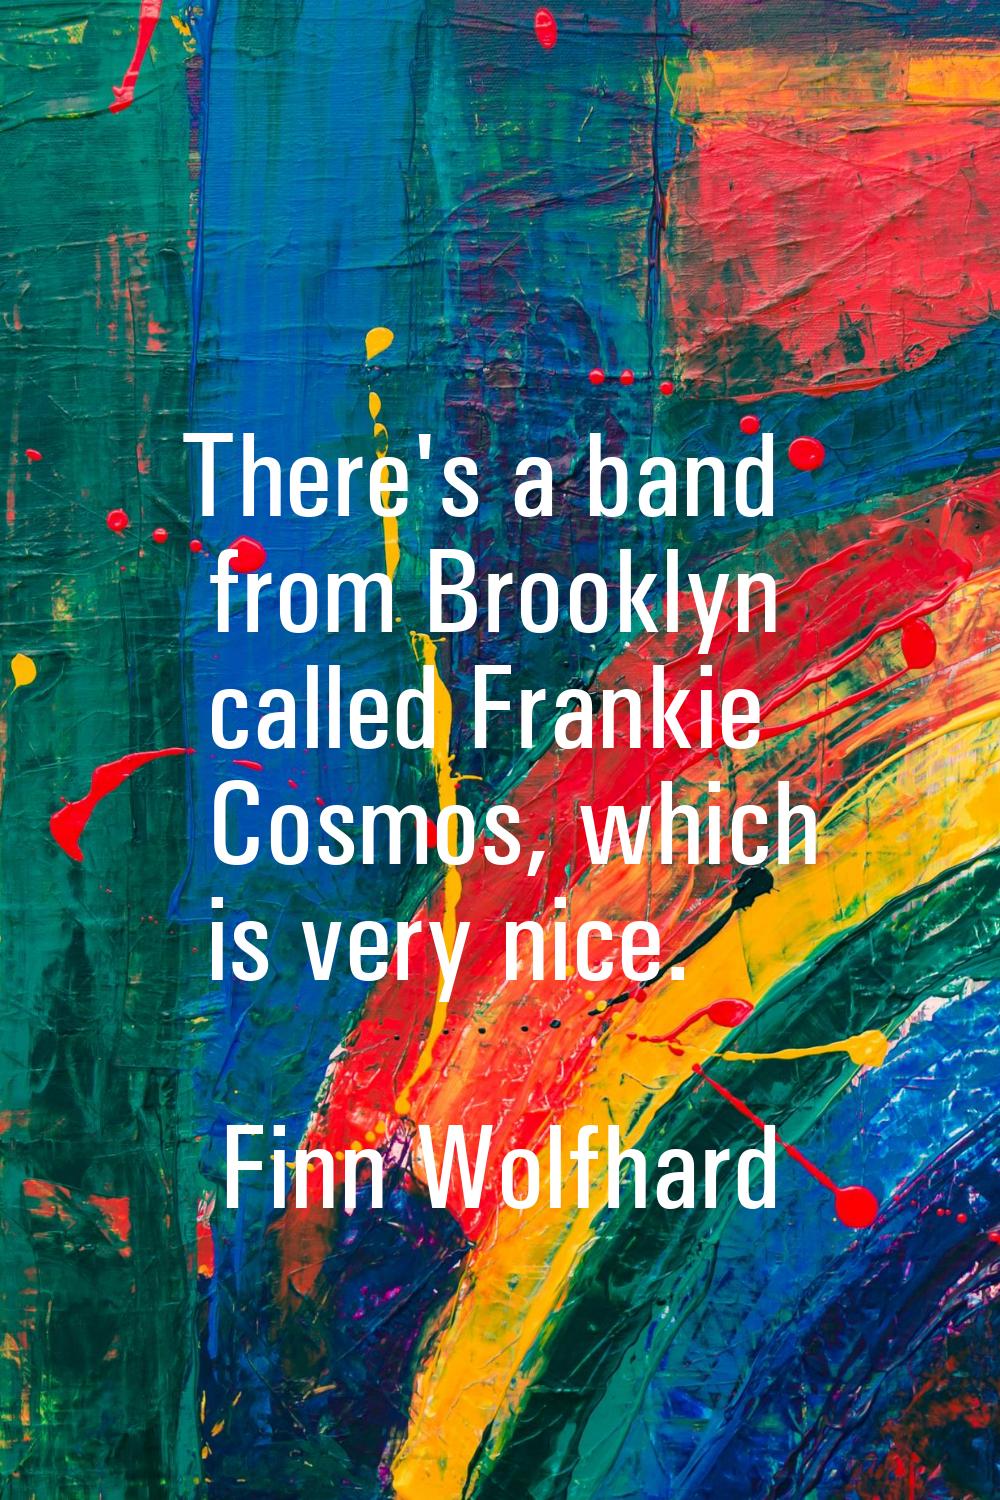 There's a band from Brooklyn called Frankie Cosmos, which is very nice.